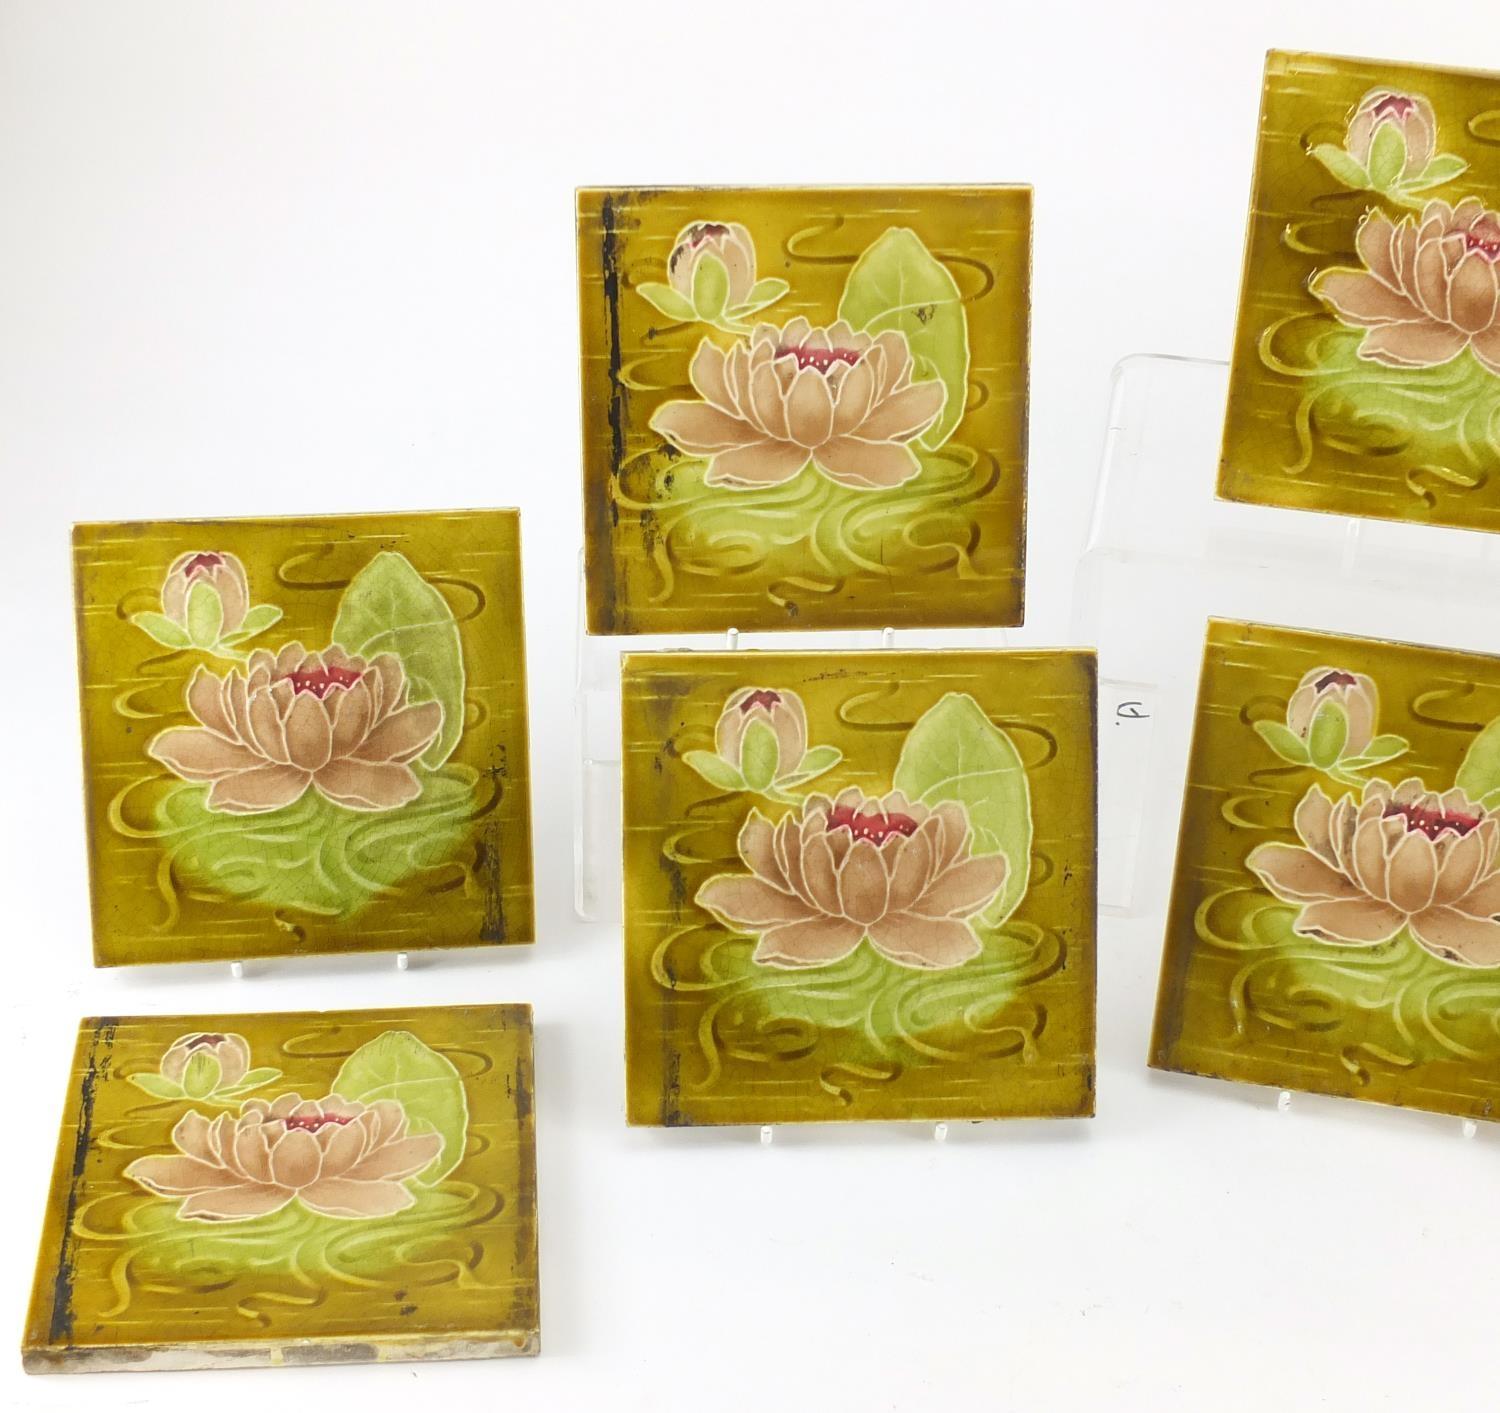 Ten Art Nouveau Maiolica tiles by Alfred Meakin, each hand painted with lily's, each 15.5cm x 15.5cm - Image 2 of 4